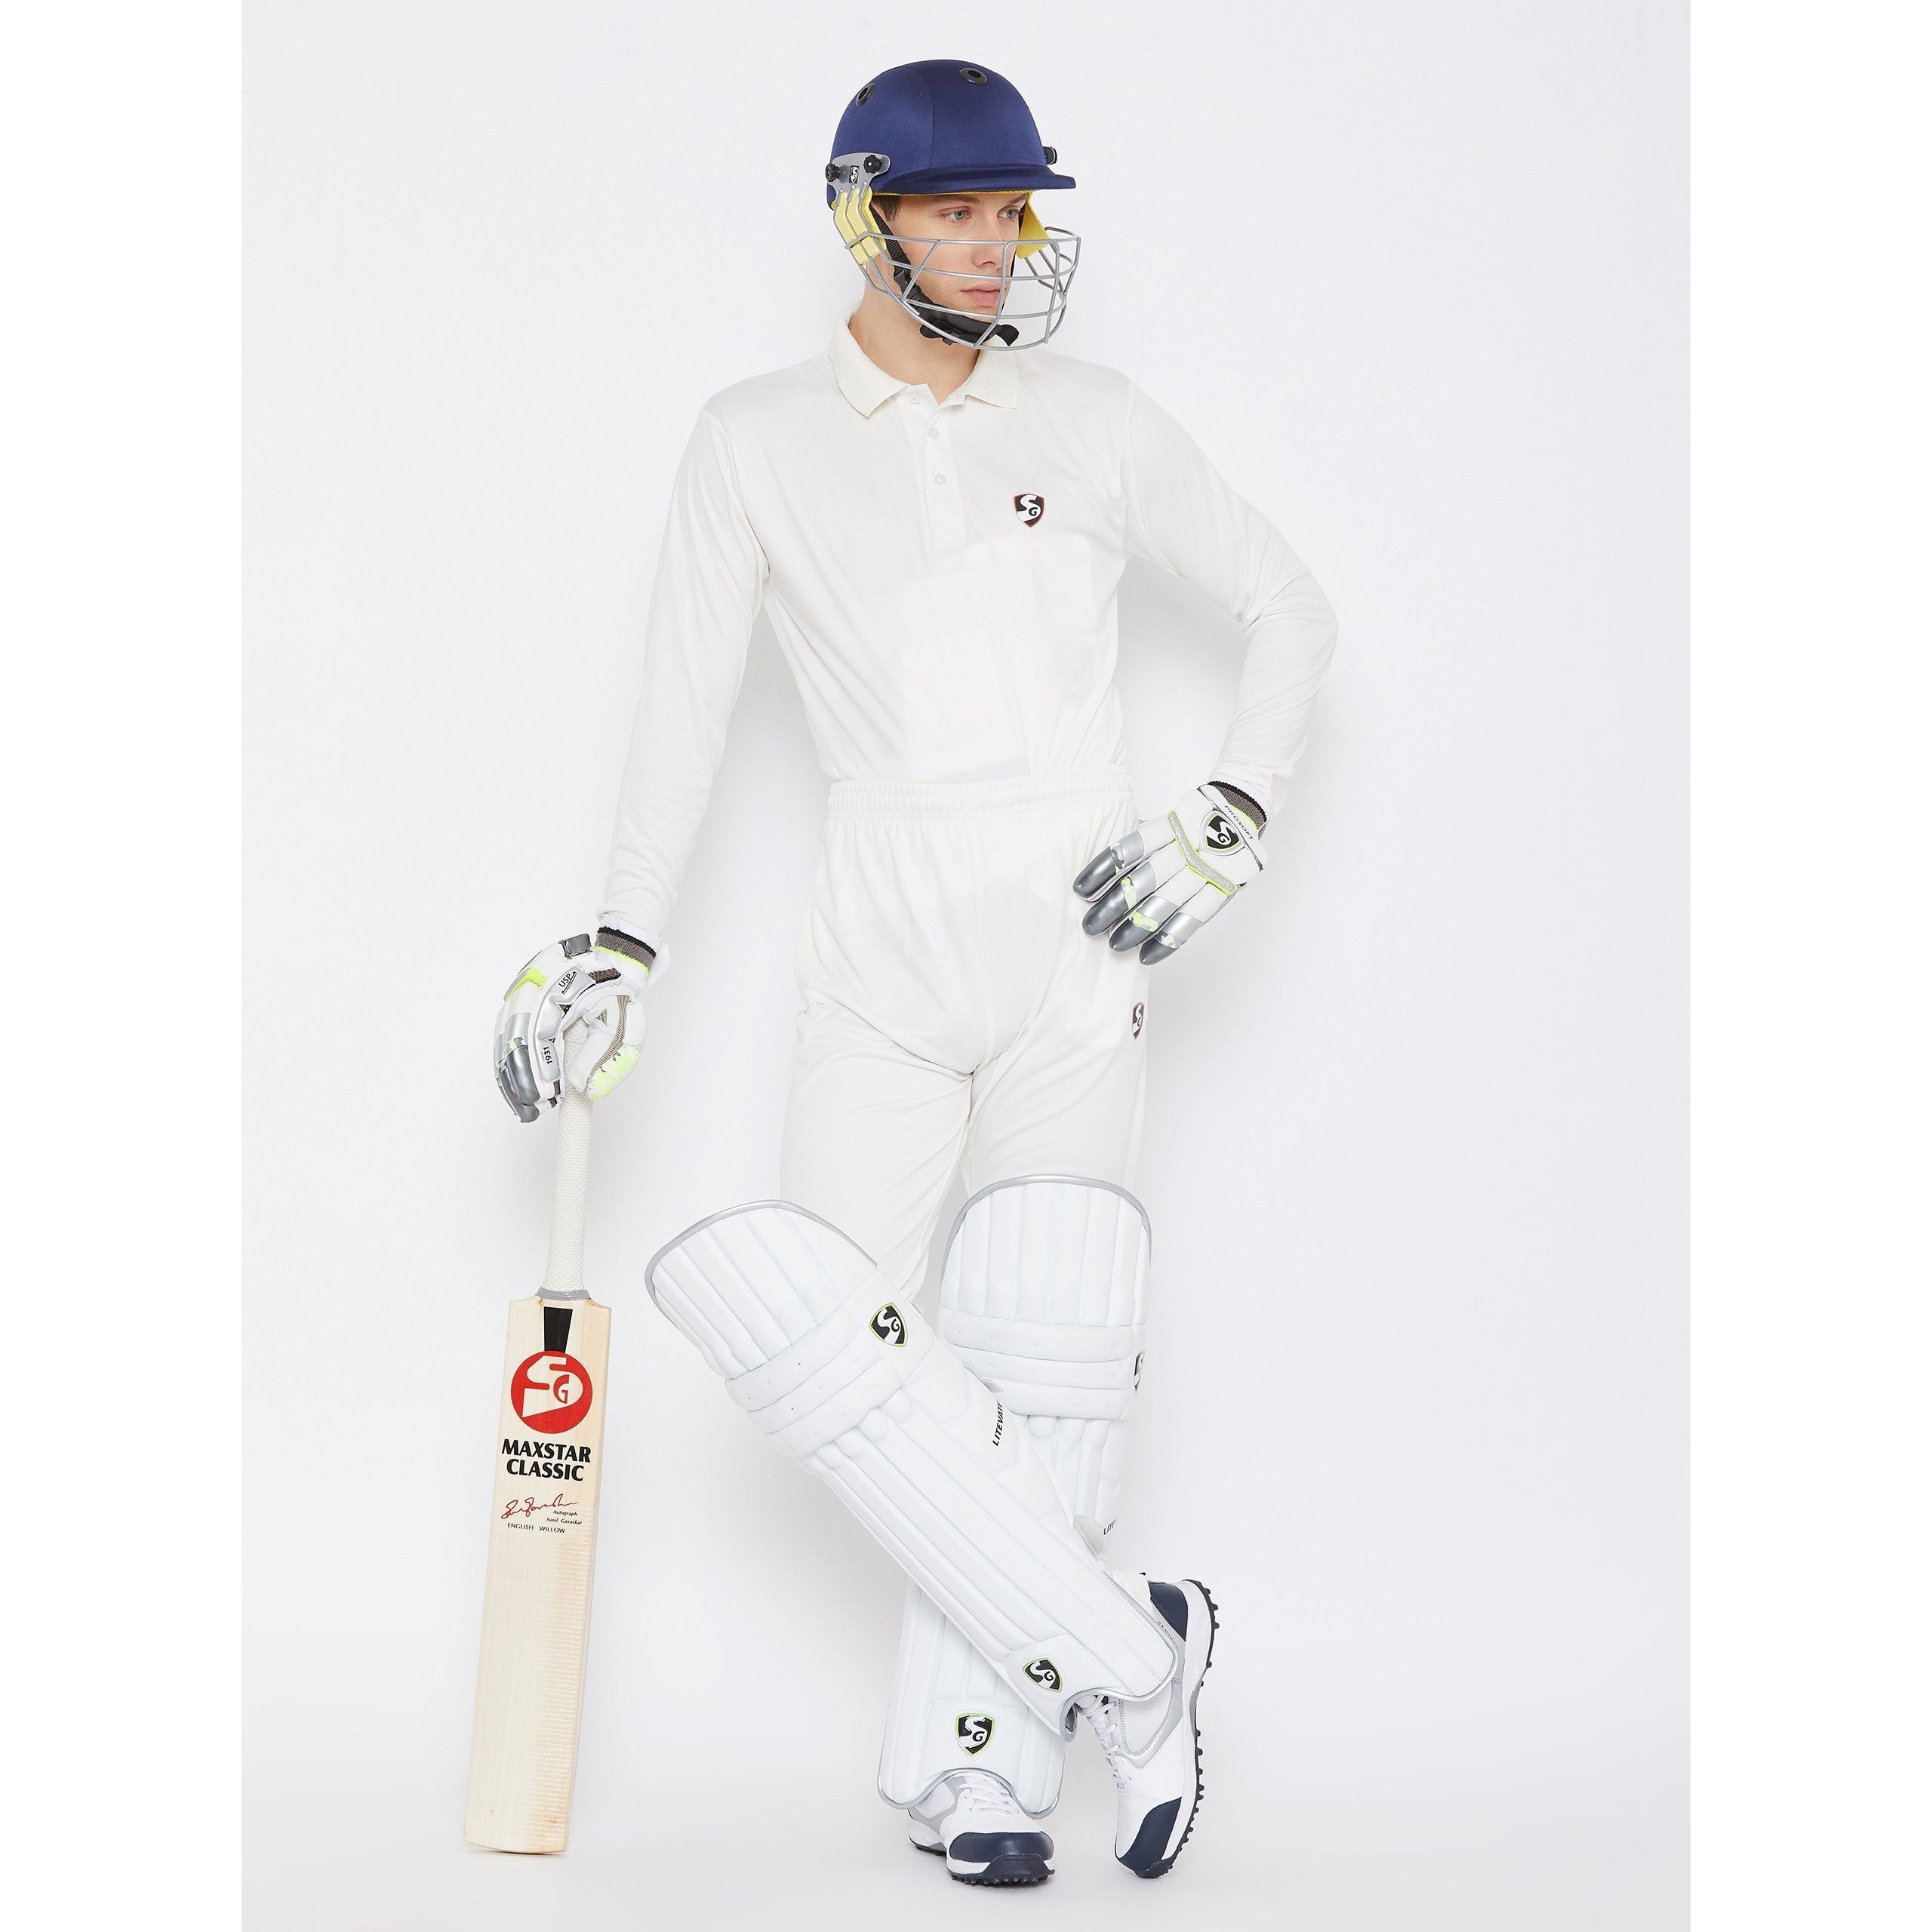 FORTRESS Junior Cricket Trousers [Boys & Girls] | 5 SIZES – Ages 5-14 Years  | eBay